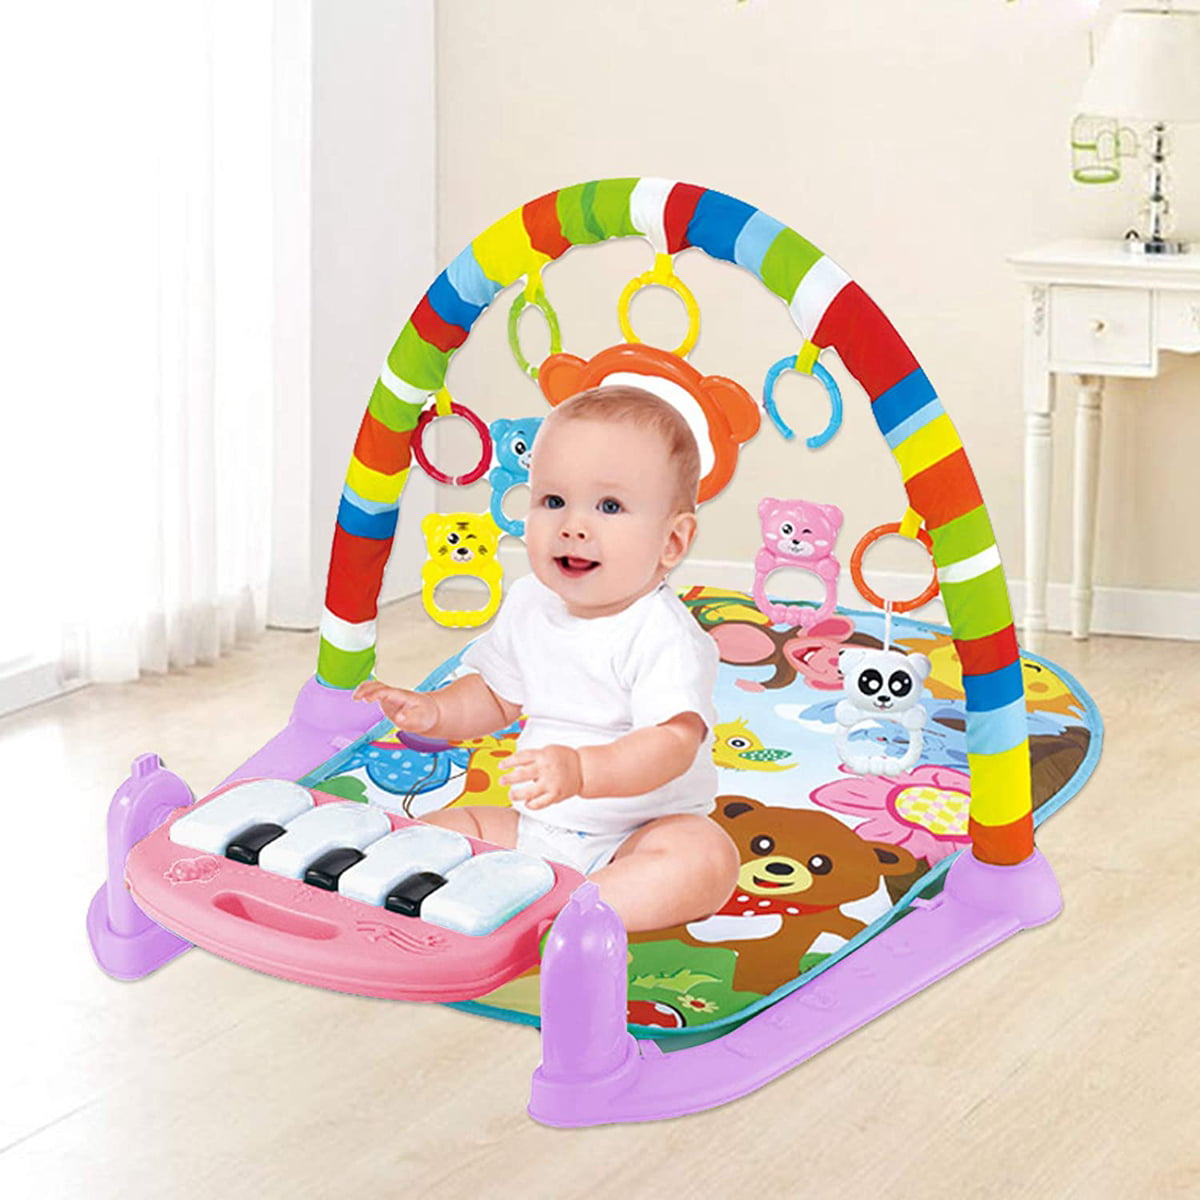 Ideal Baby Shower Gifts WYSWYG Baby Gym Play Mats for Infants Baby Play Gym Activity Mat Kick and Play Piano Gym Activity Center for Baby with Music and Lights